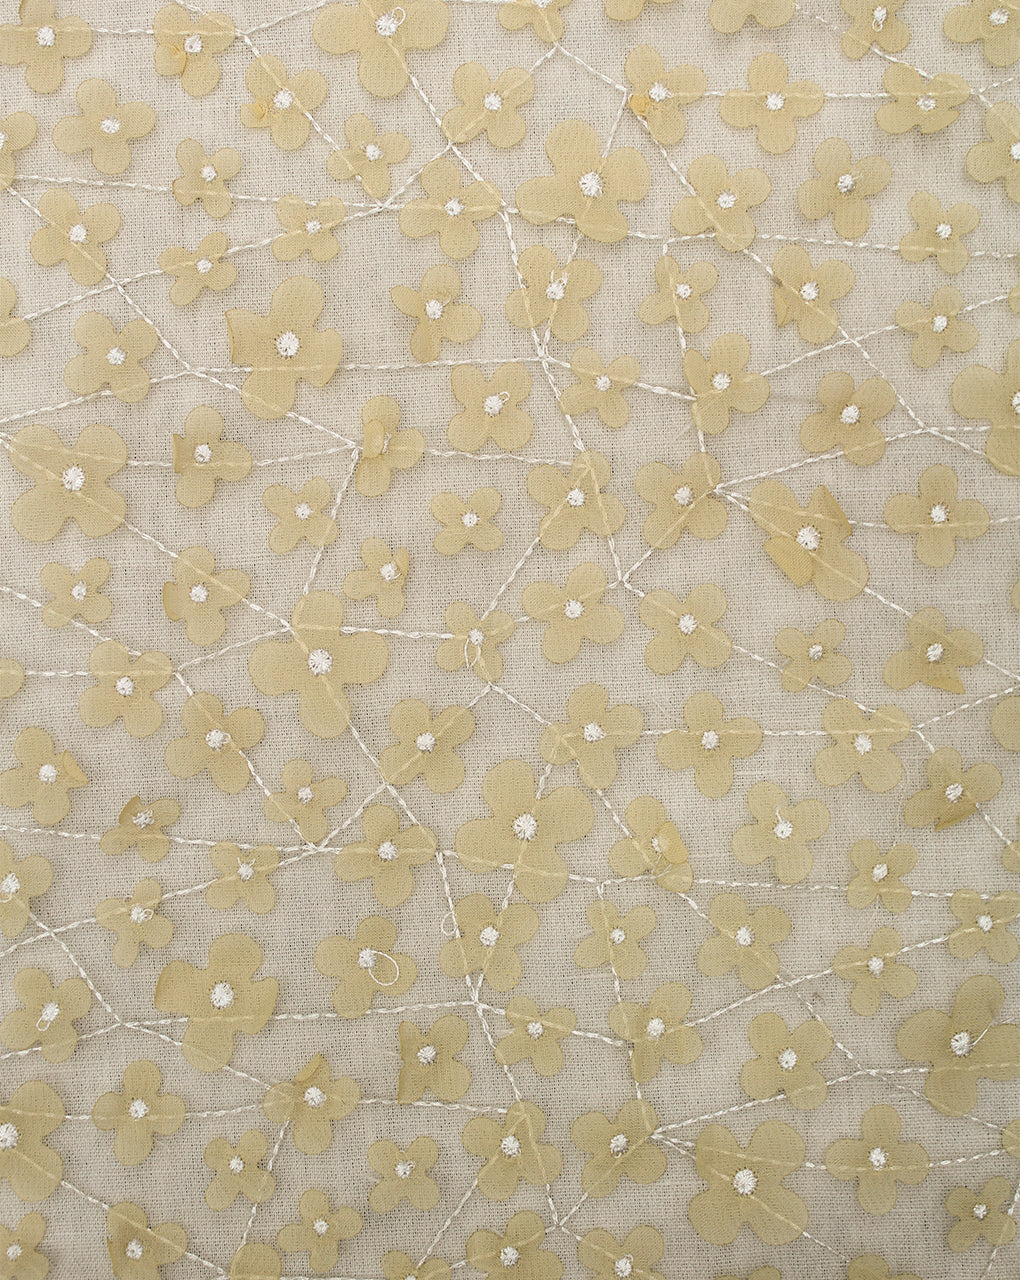 FLORAL POLYESTER EMBROIDERY DESIGNER NET FABRIC